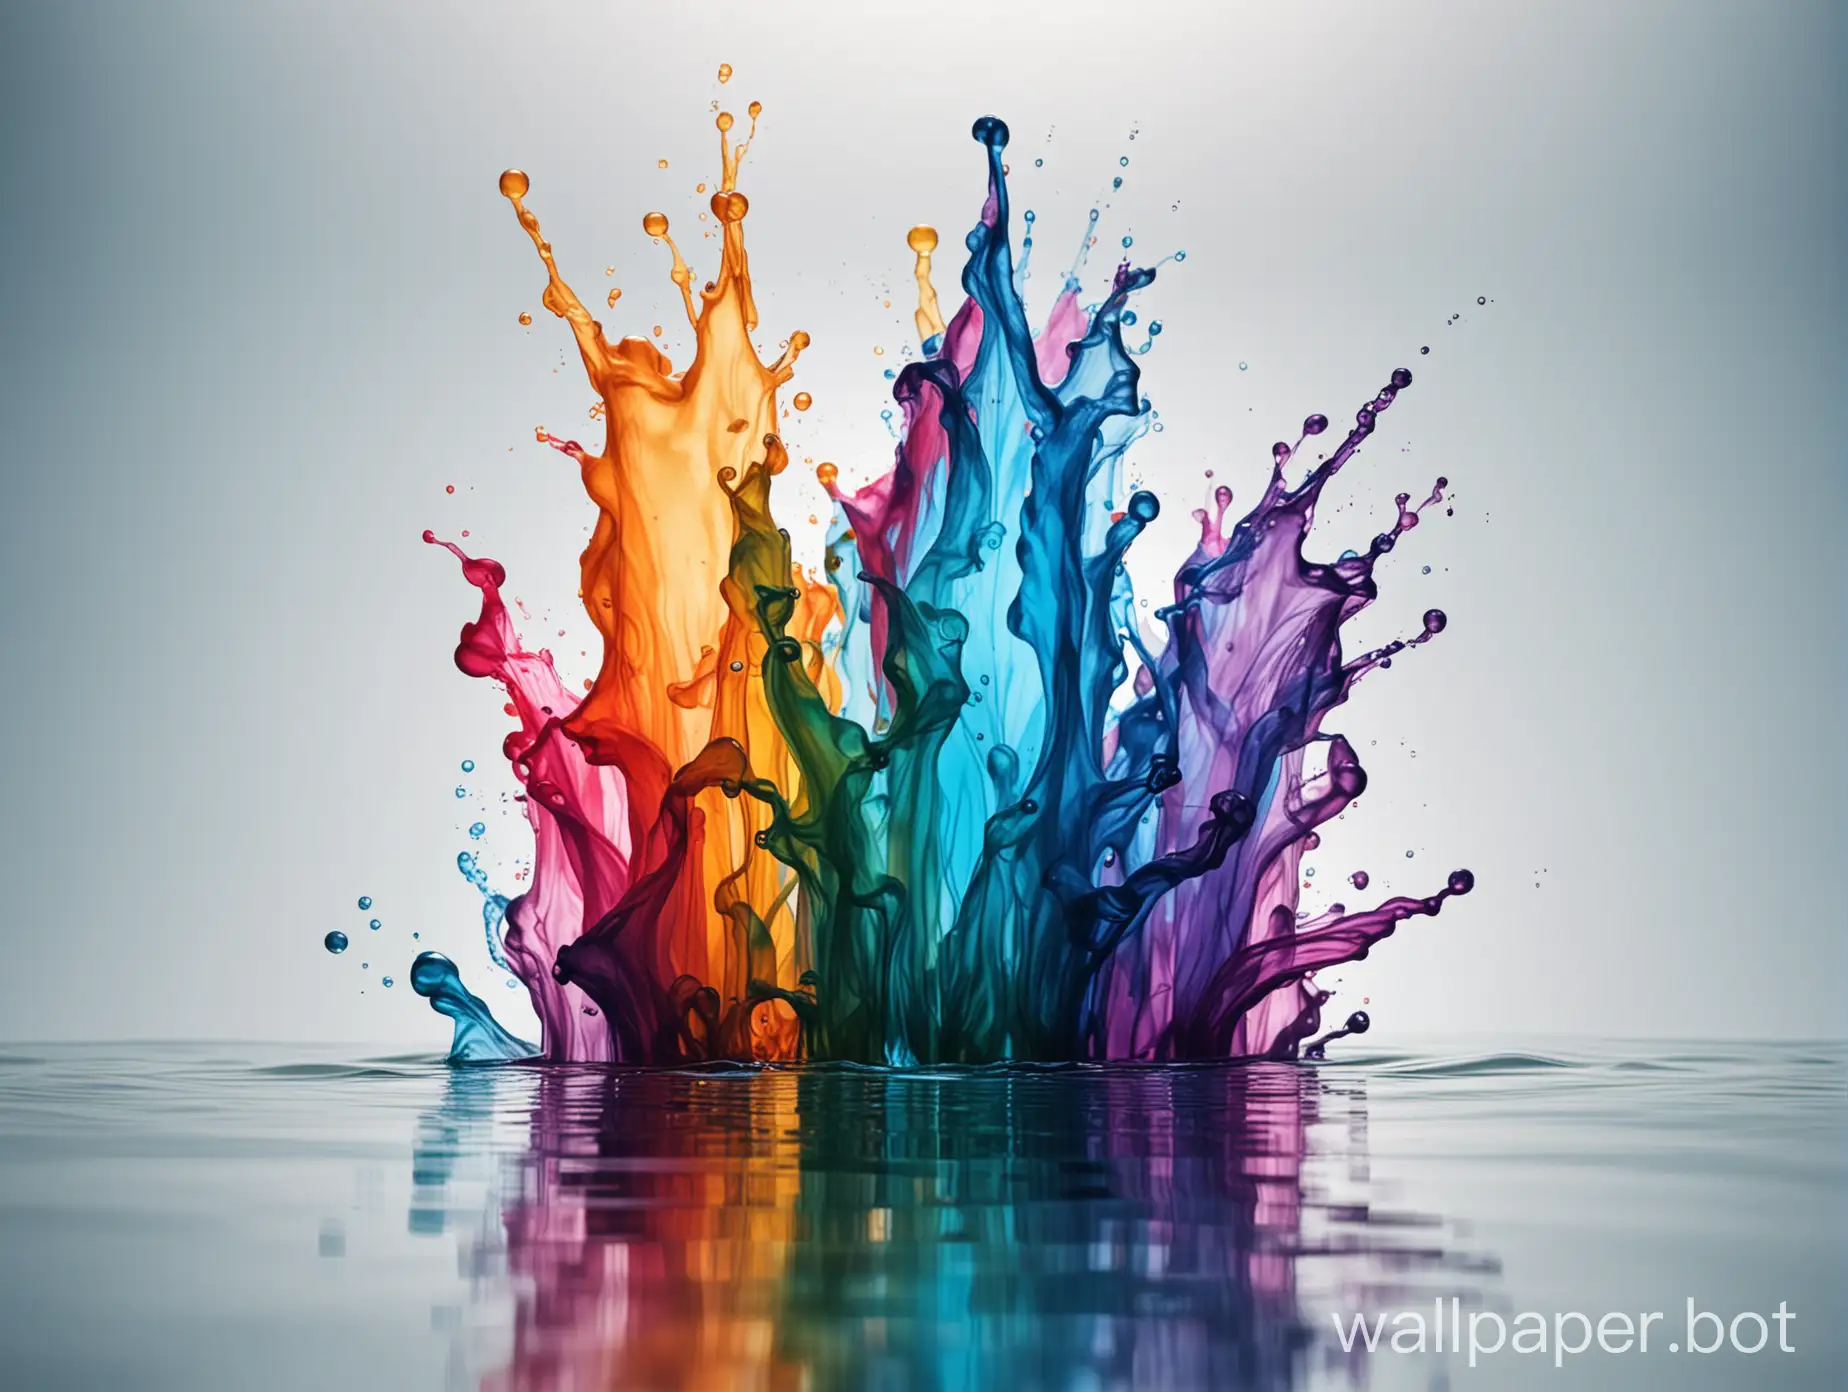 colorful inks inthe transparent clean water